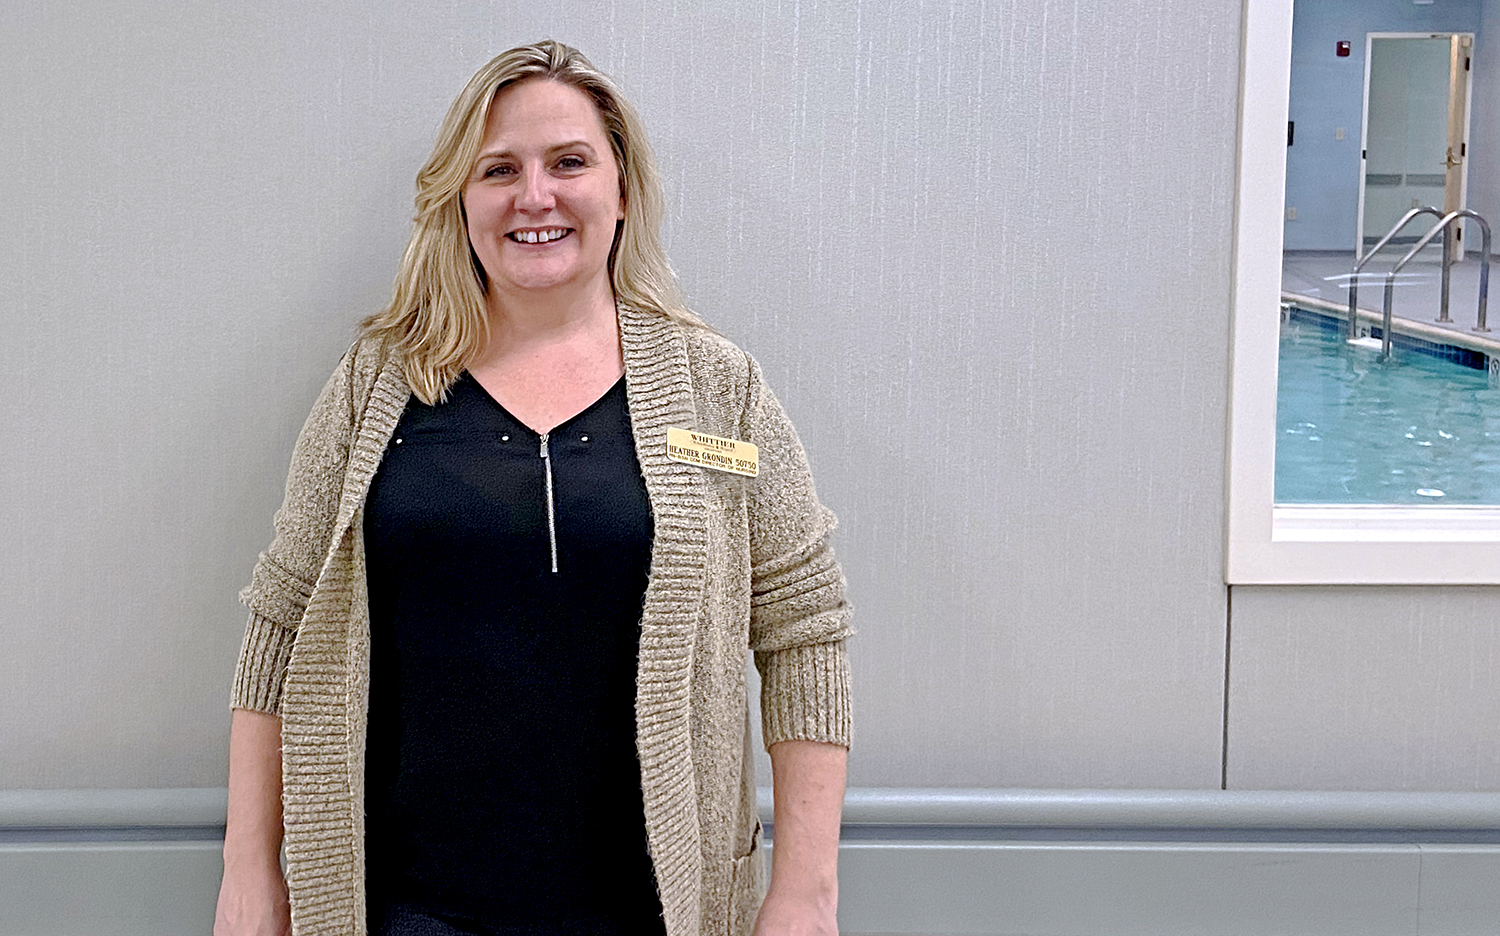 A talk with Heather Grondin, Director of Nursing at Whittier Rehabilitation Hospital-Bradford, on Whittier’s commitment to staff training and continuing education.